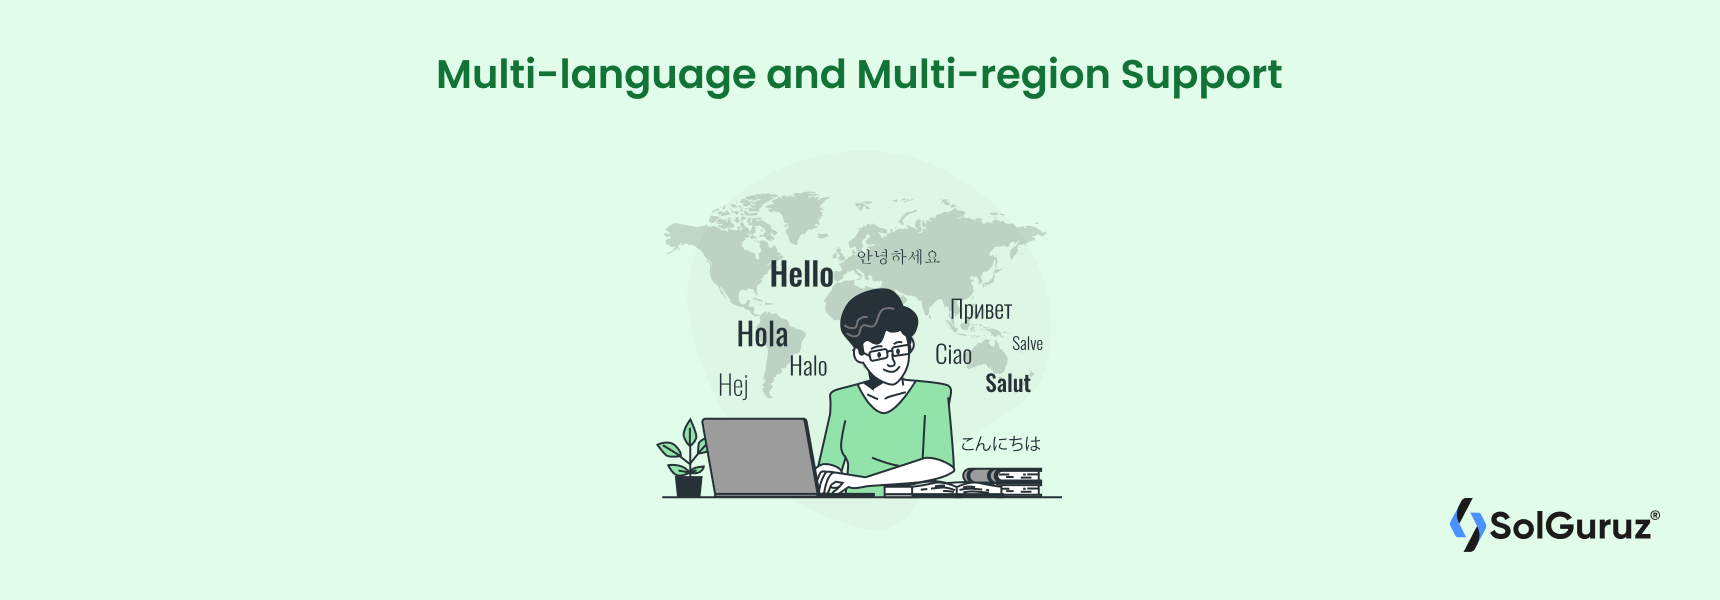 Multi-language and Multi-region Support for the mobile apps